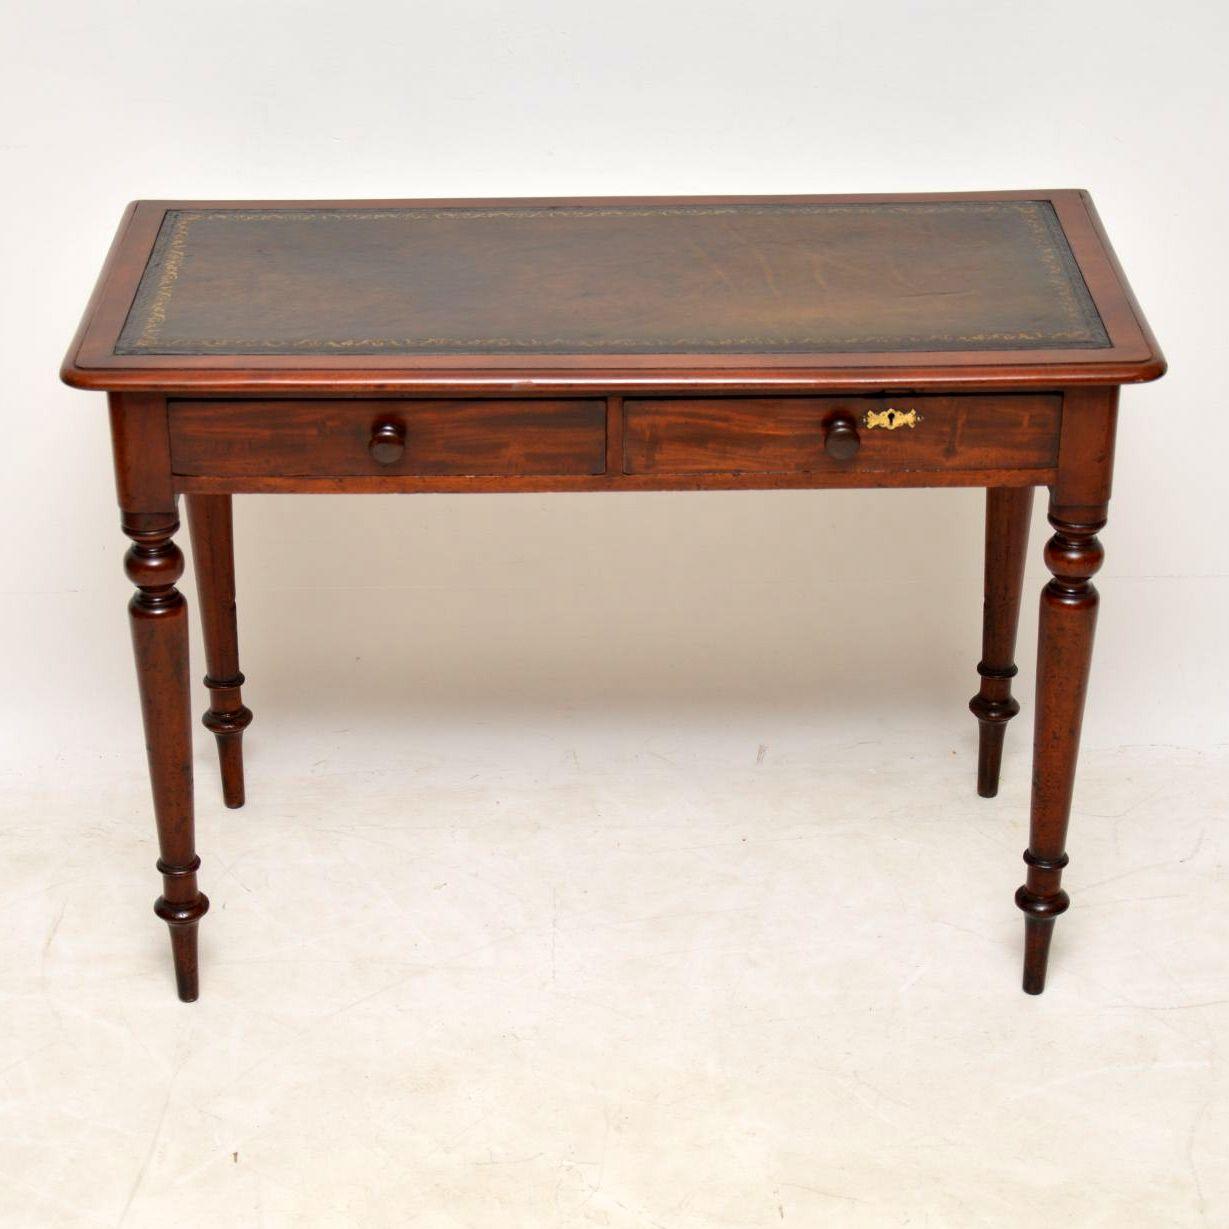 Fine quality antique Victorian mahogany writing table with a tooled leather writing surface. It's in good original condition and has lots of character, with a lovely warm original color. There are two drawers with mahogany handles and fine